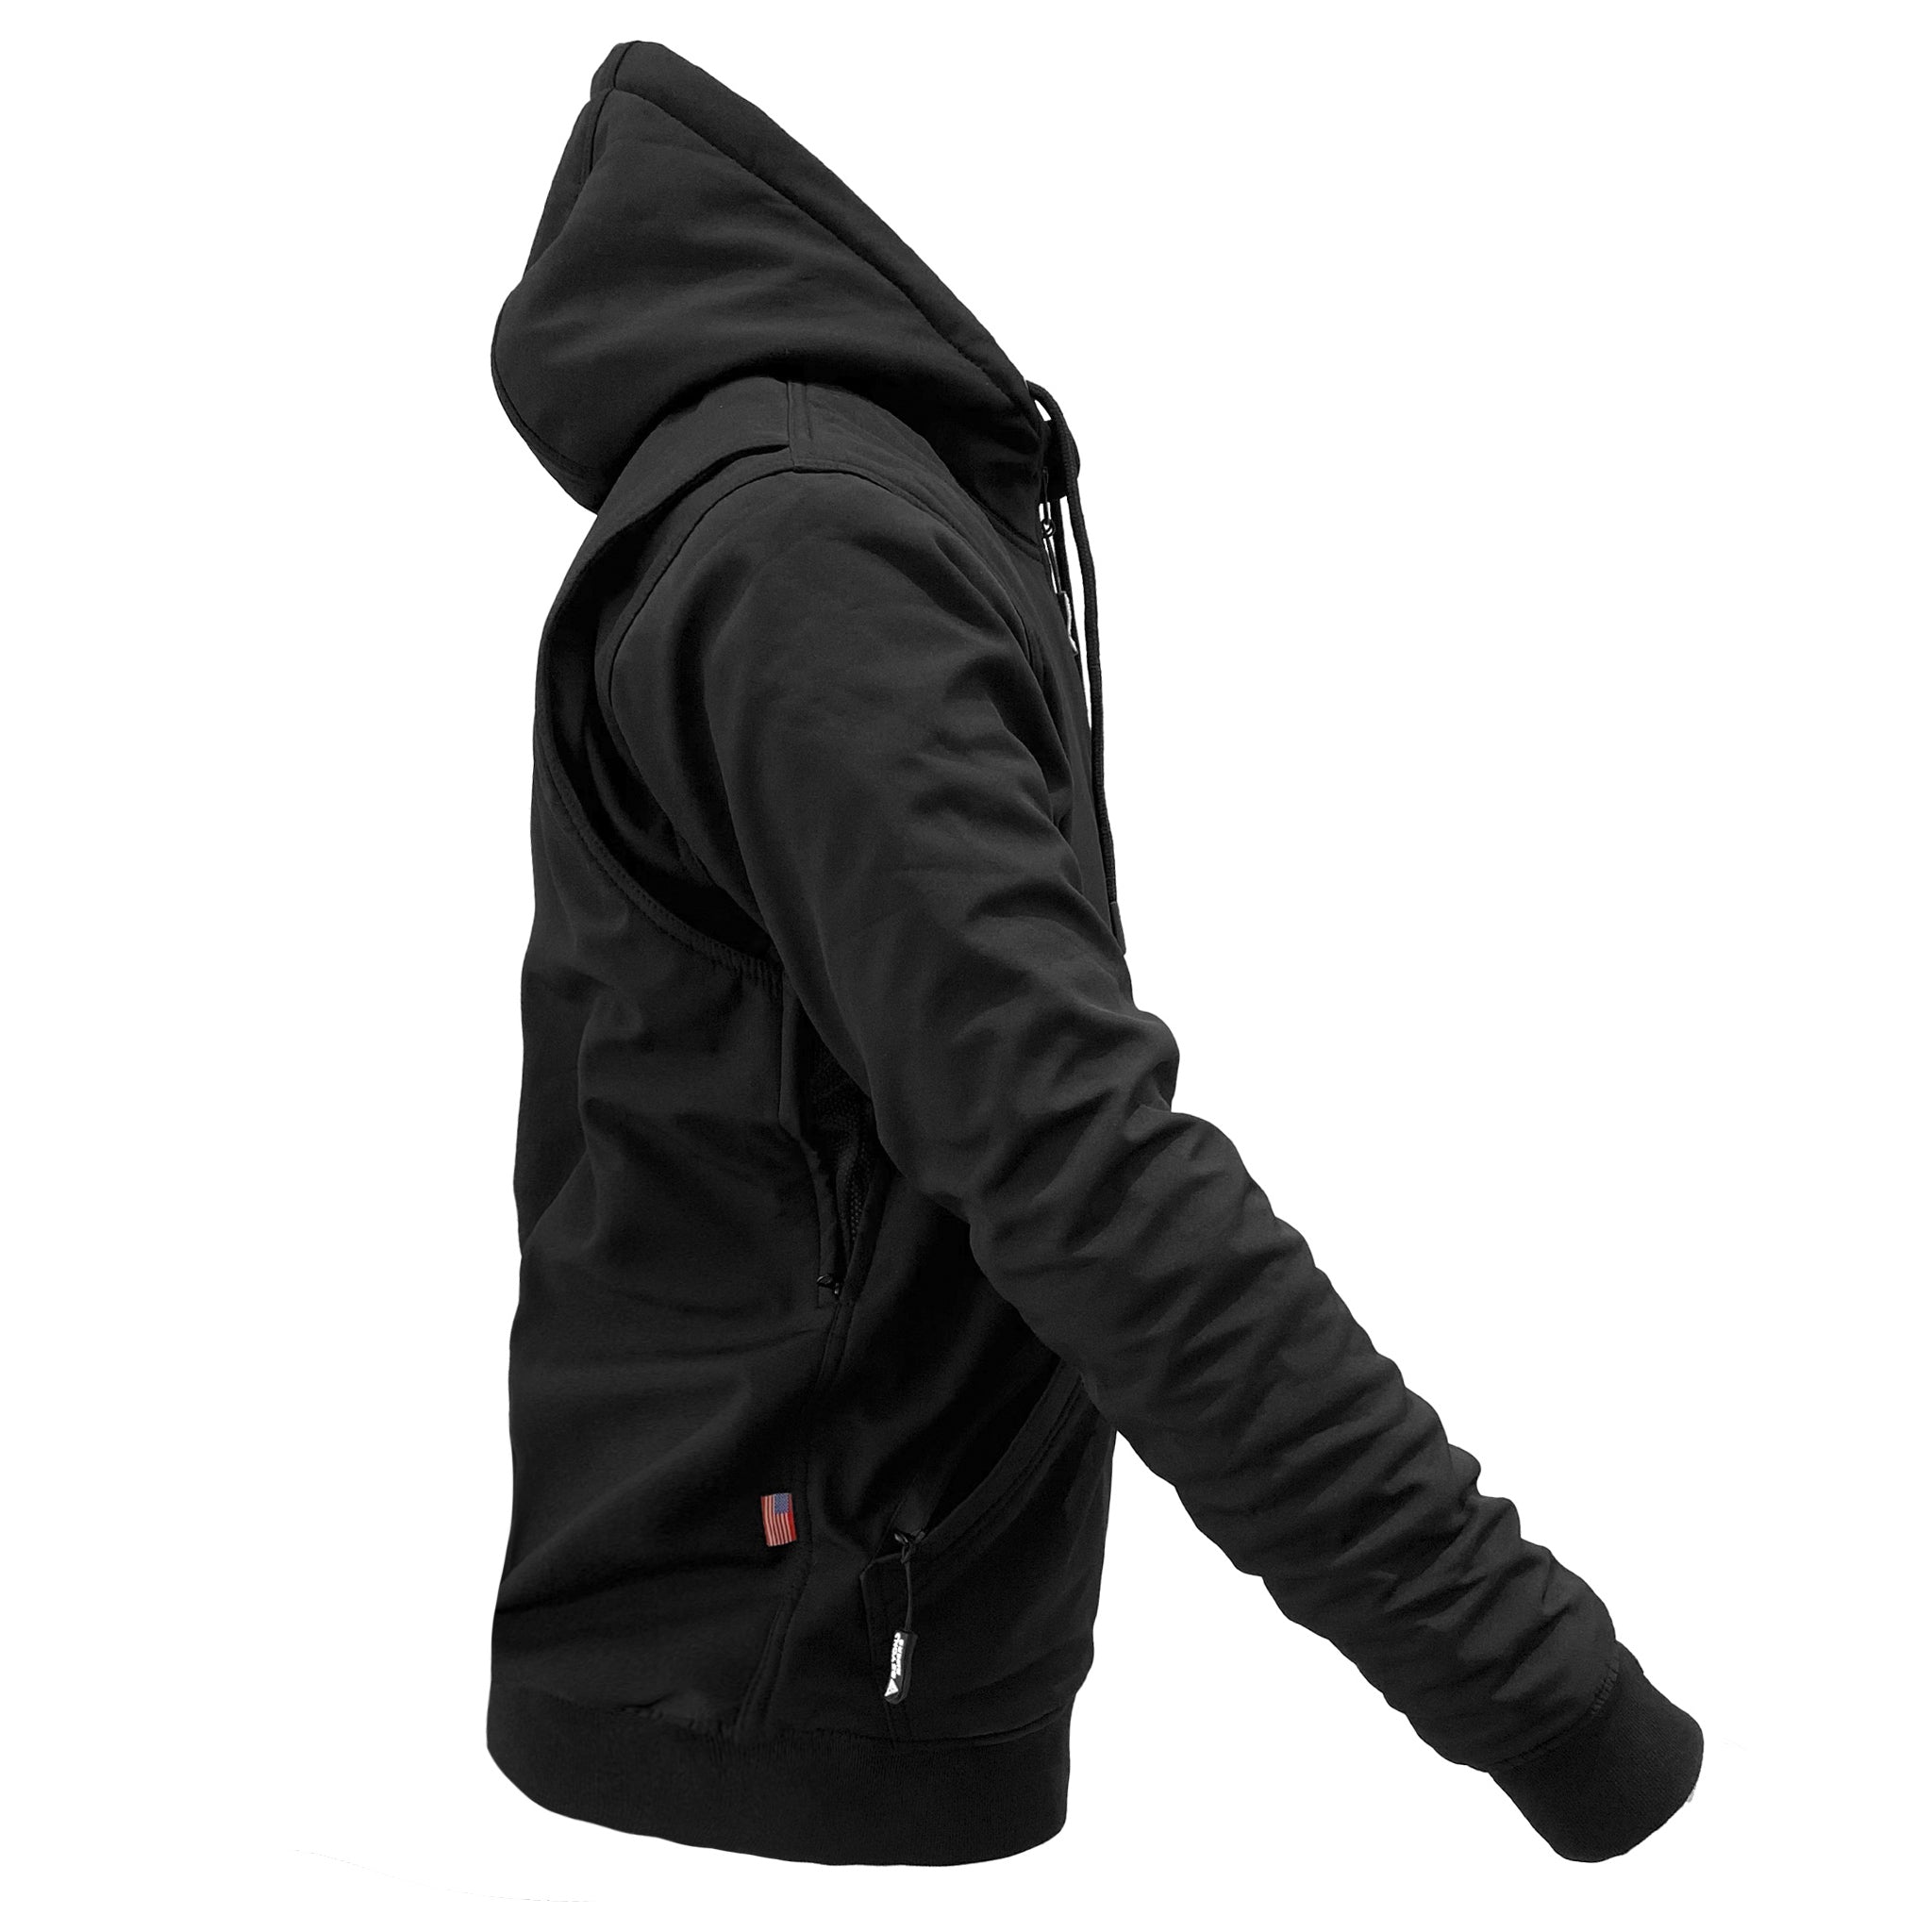 Special Collection Protective SoftShell Unisex Hoodie - Black Matte with Pads